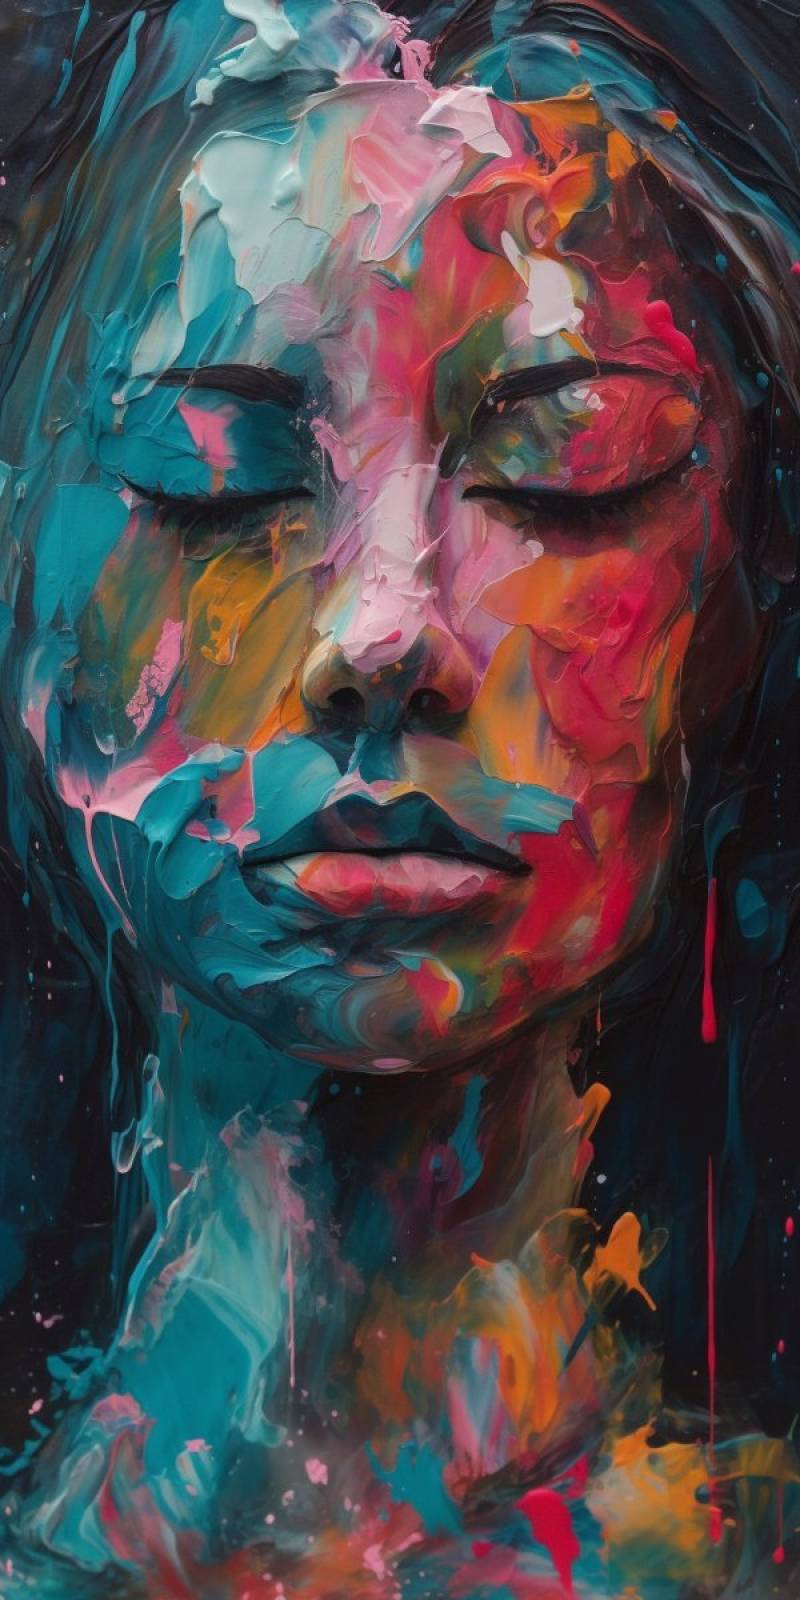 Painting oil canvas abstract women face astonishing image surprising showing the state of wild of global warming on la painting oil canvas abstract women face